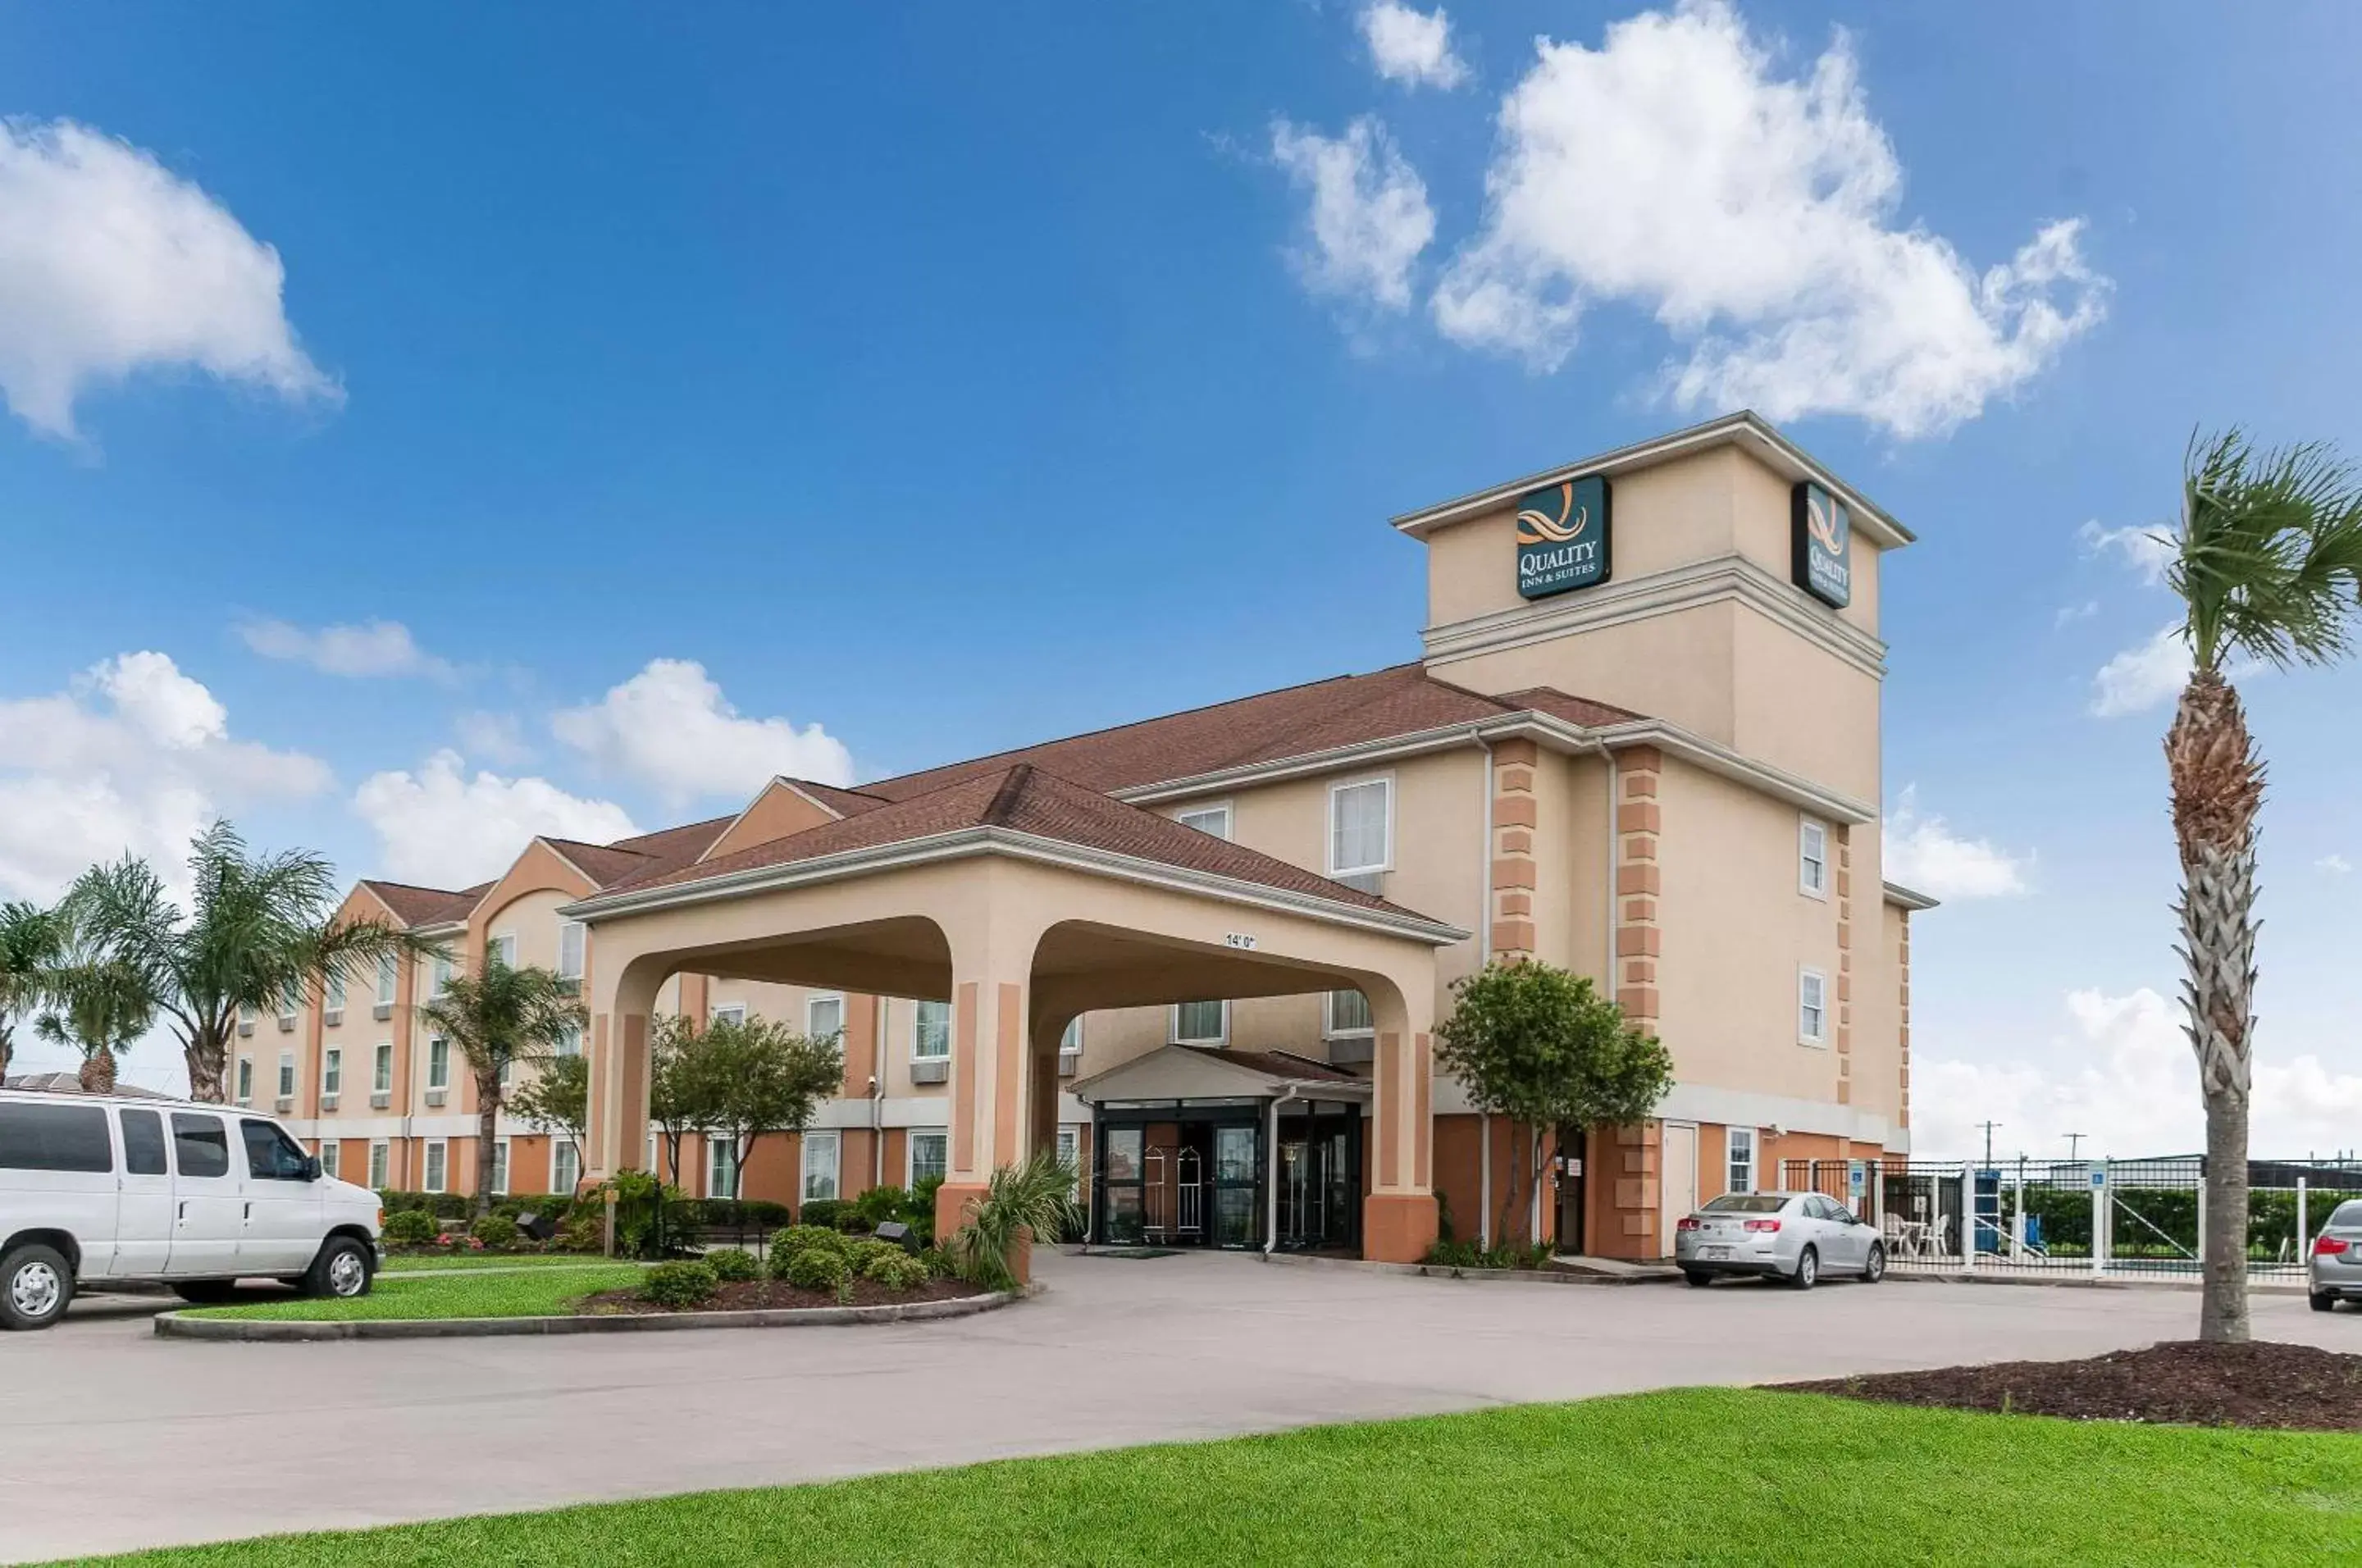 Property Building in Quality Inn & Suites Houma